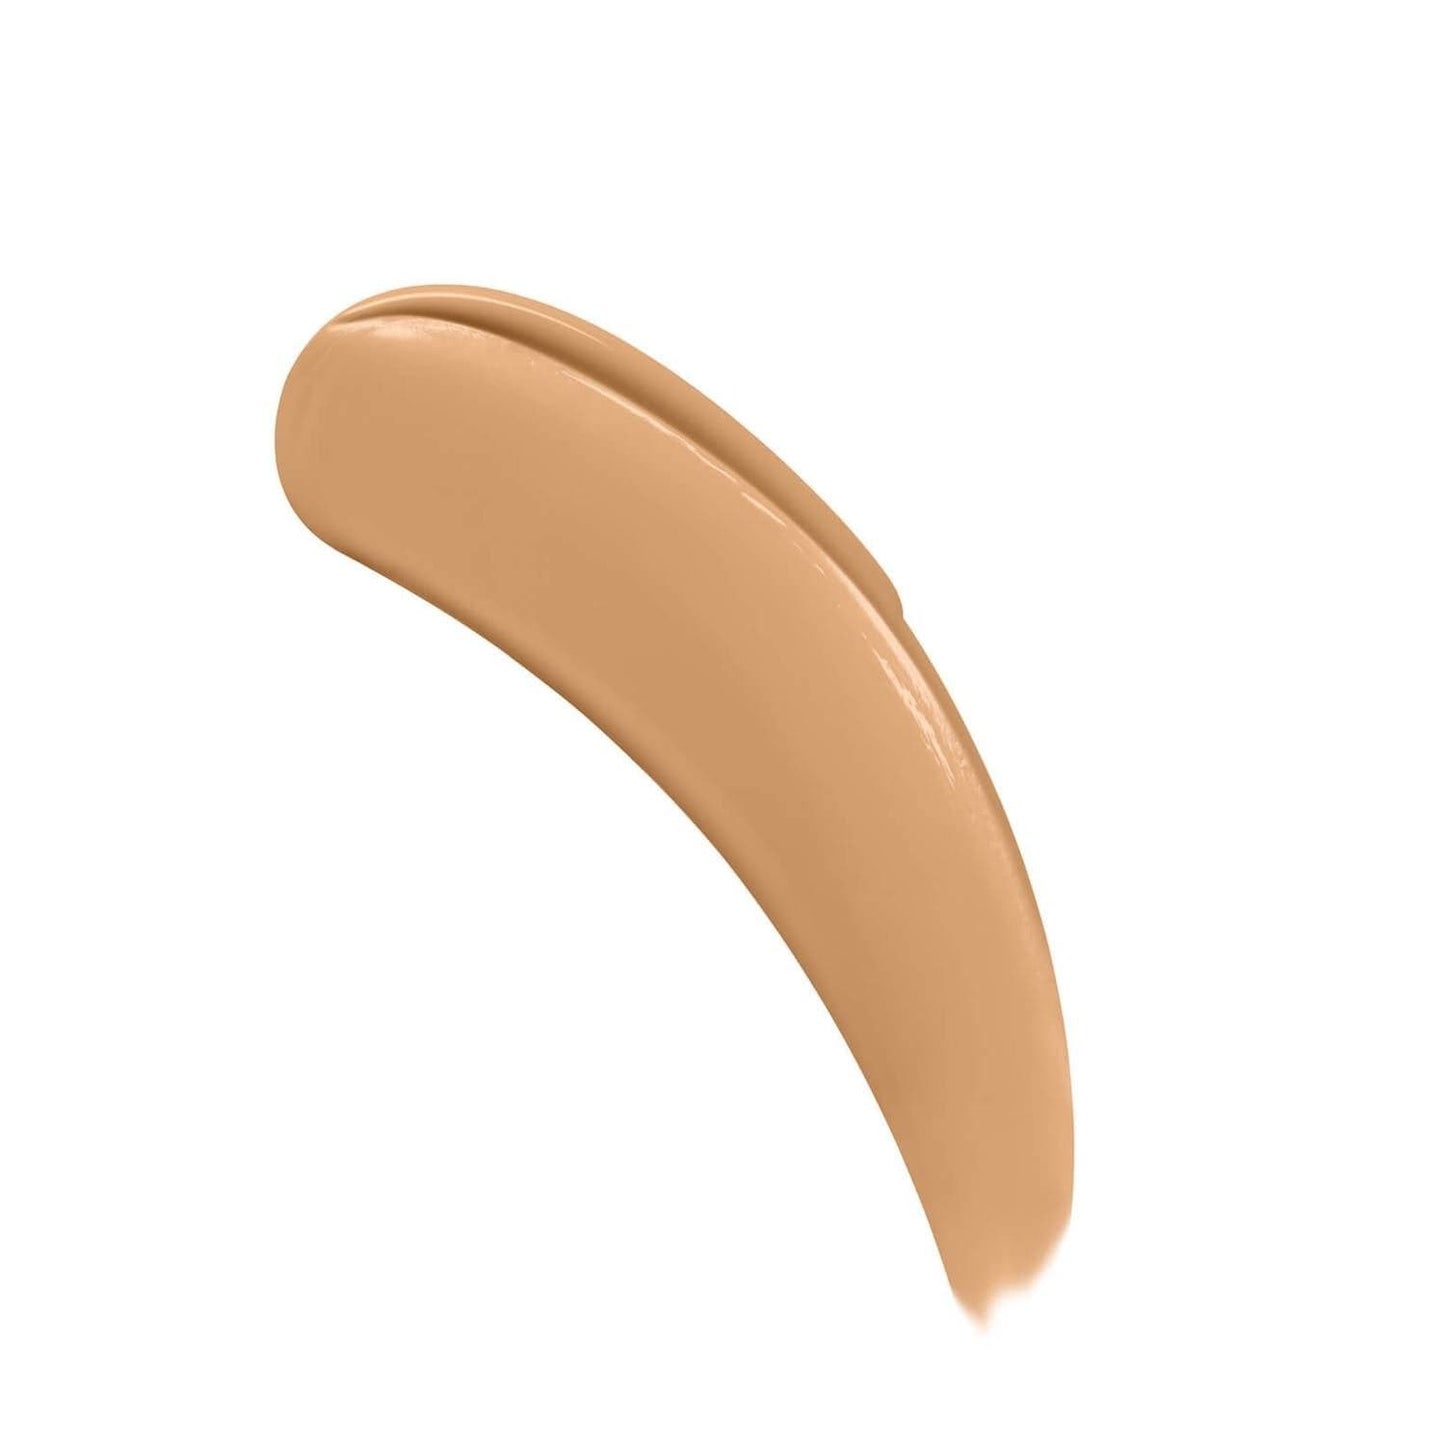 IT COSMETICS Beauty IT Cosmetics Your Skin But Better Foundation and Skincare 30ml - 40 Tan Cool